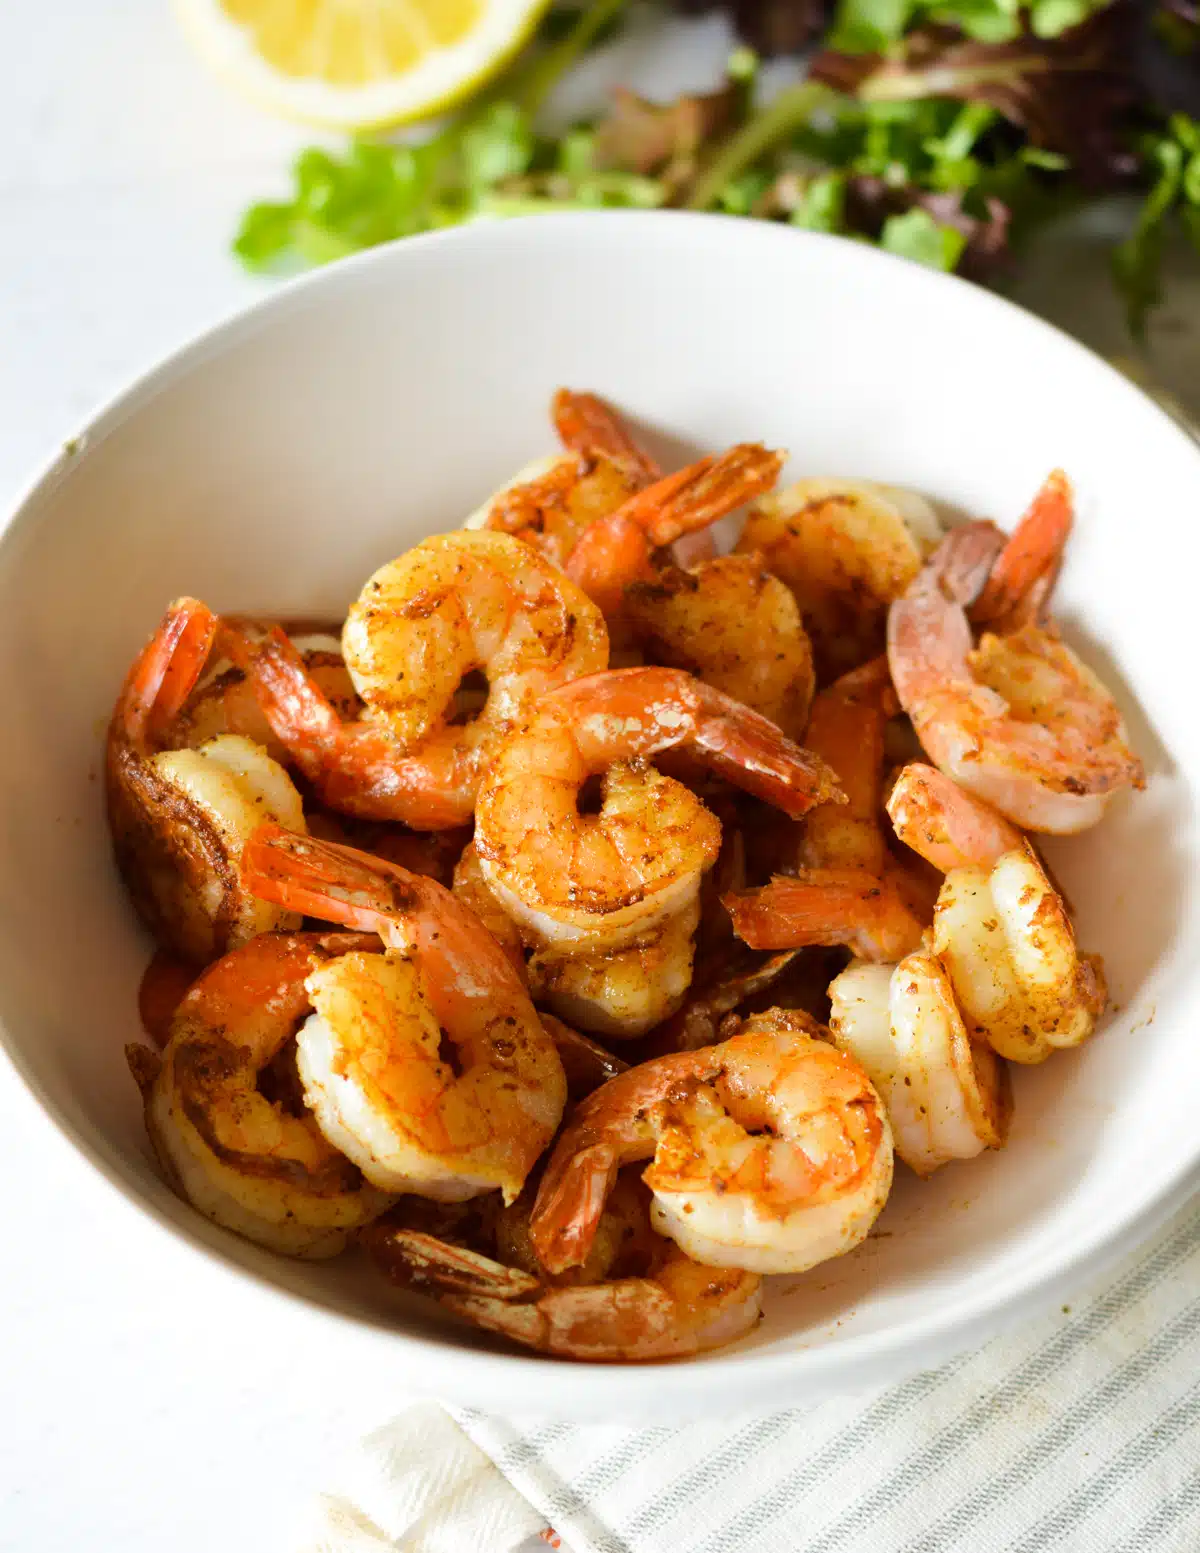 Grilled shrimp in a white bowl with lemon wedges.